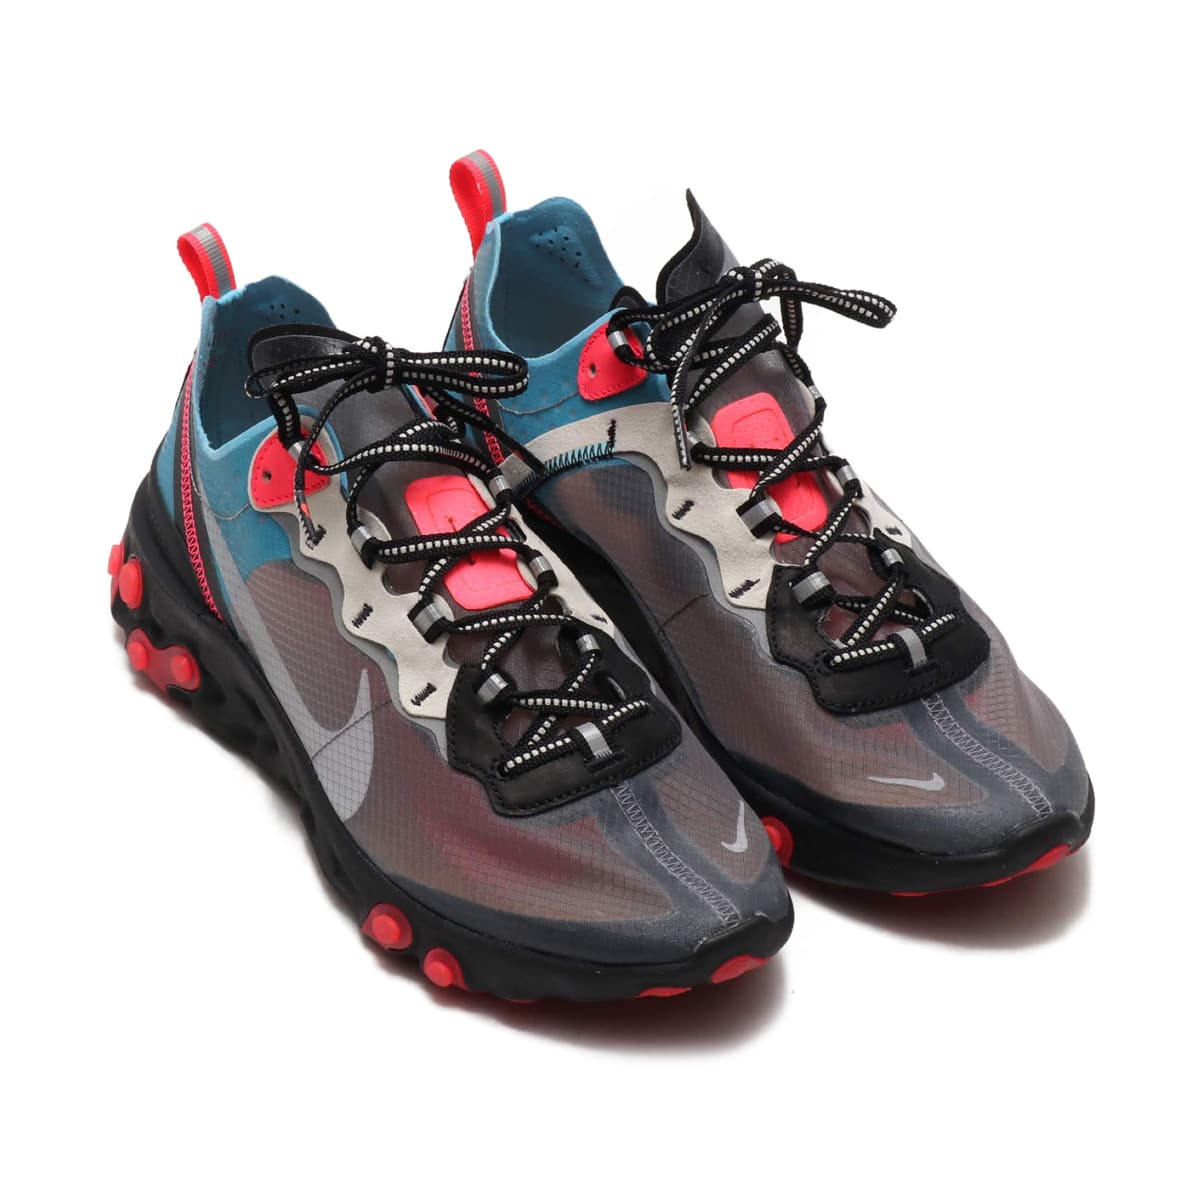 nike react element 87 chill blue solar red